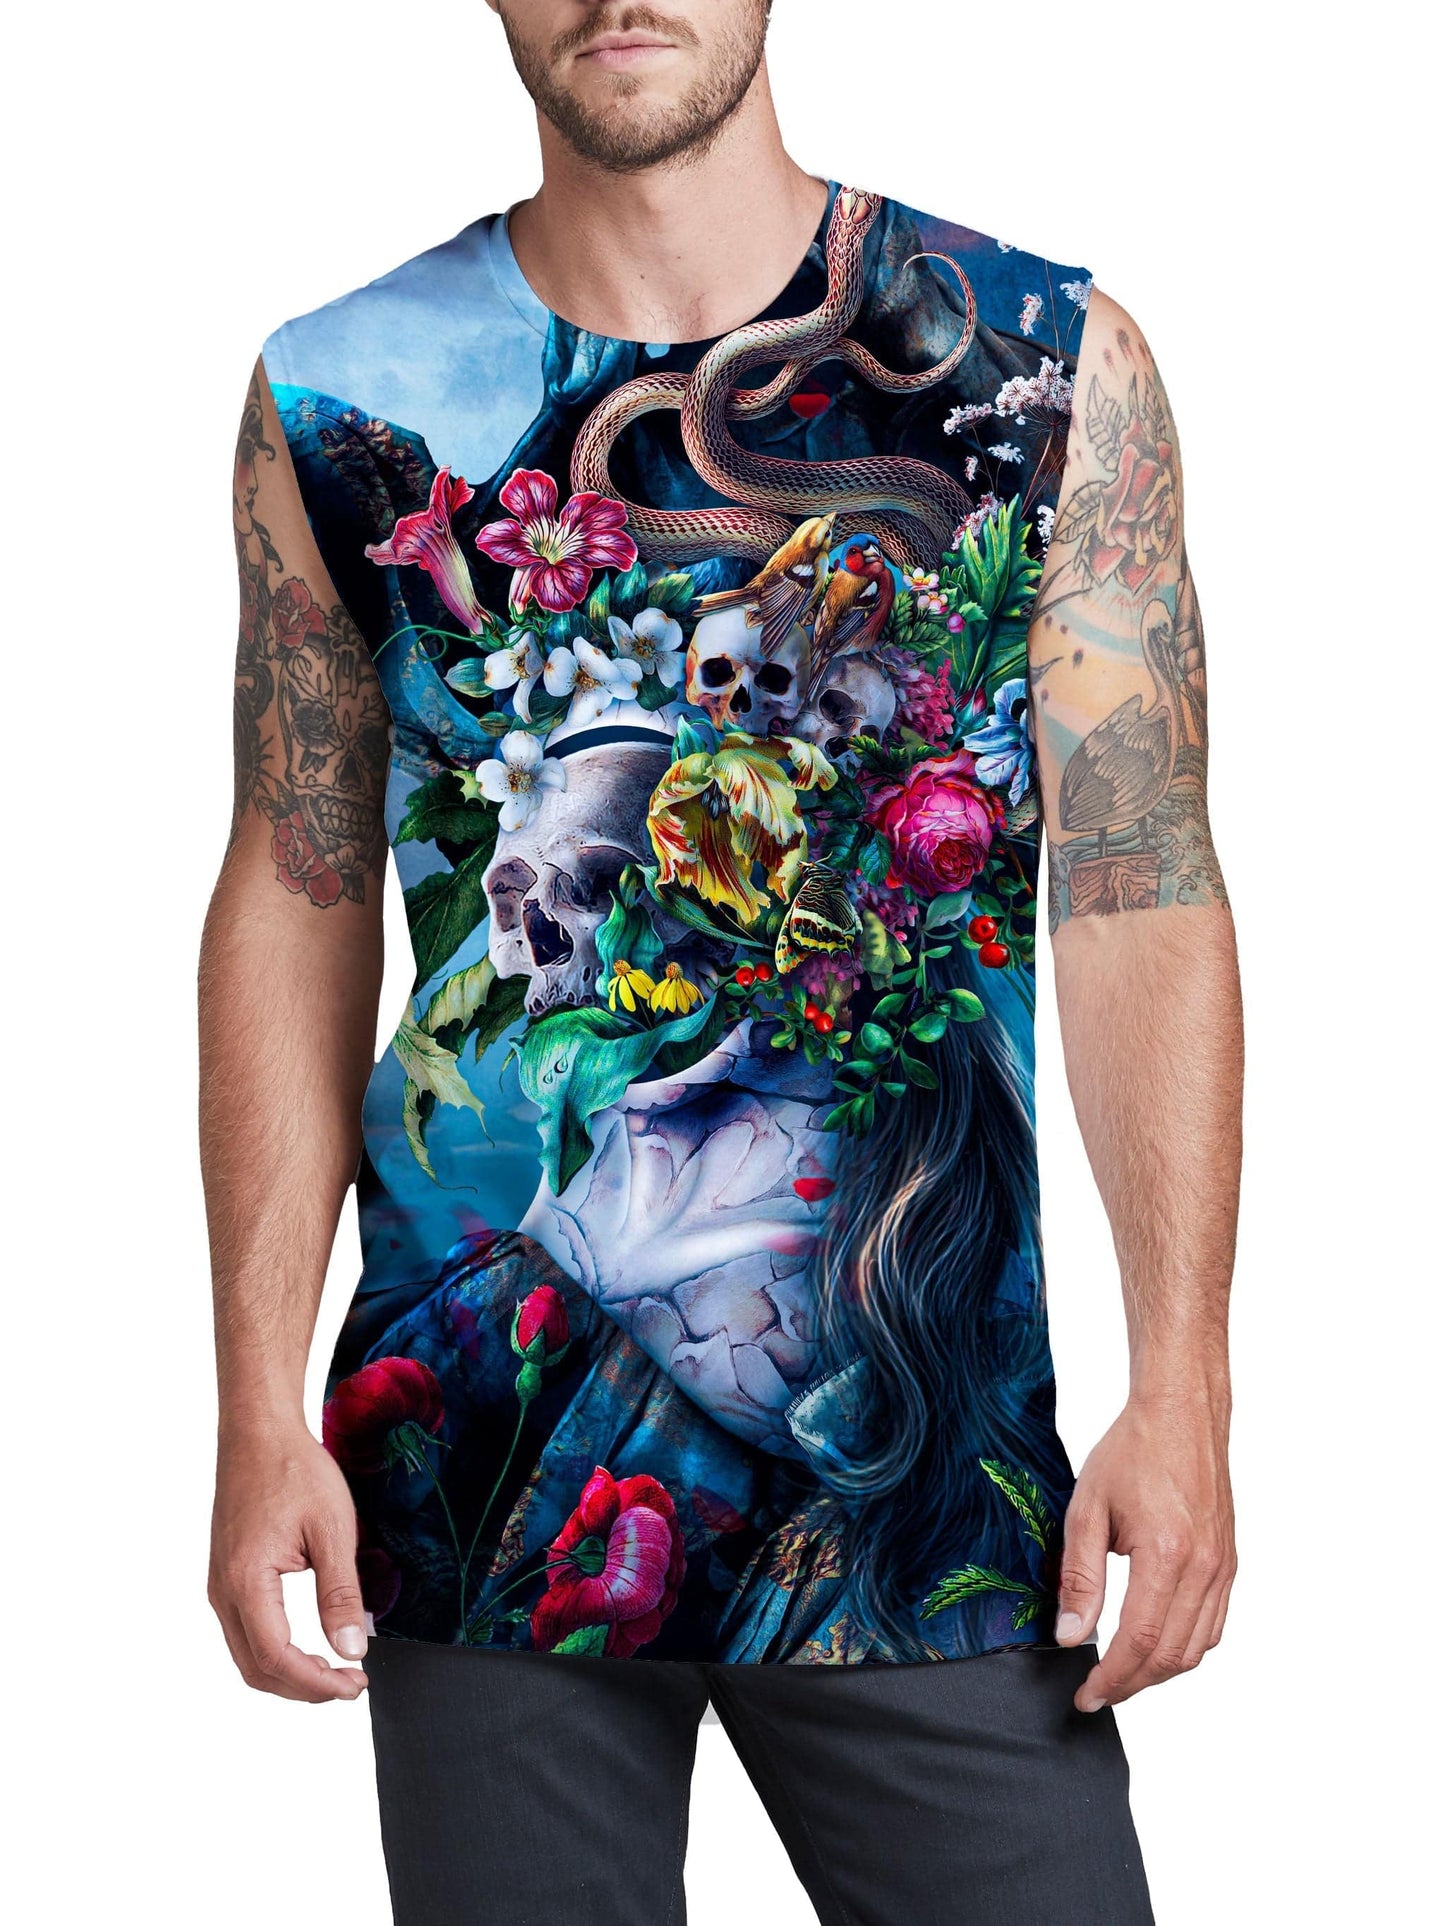 Live and Die Men's Muscle Tank, Riza Peker, | iEDM